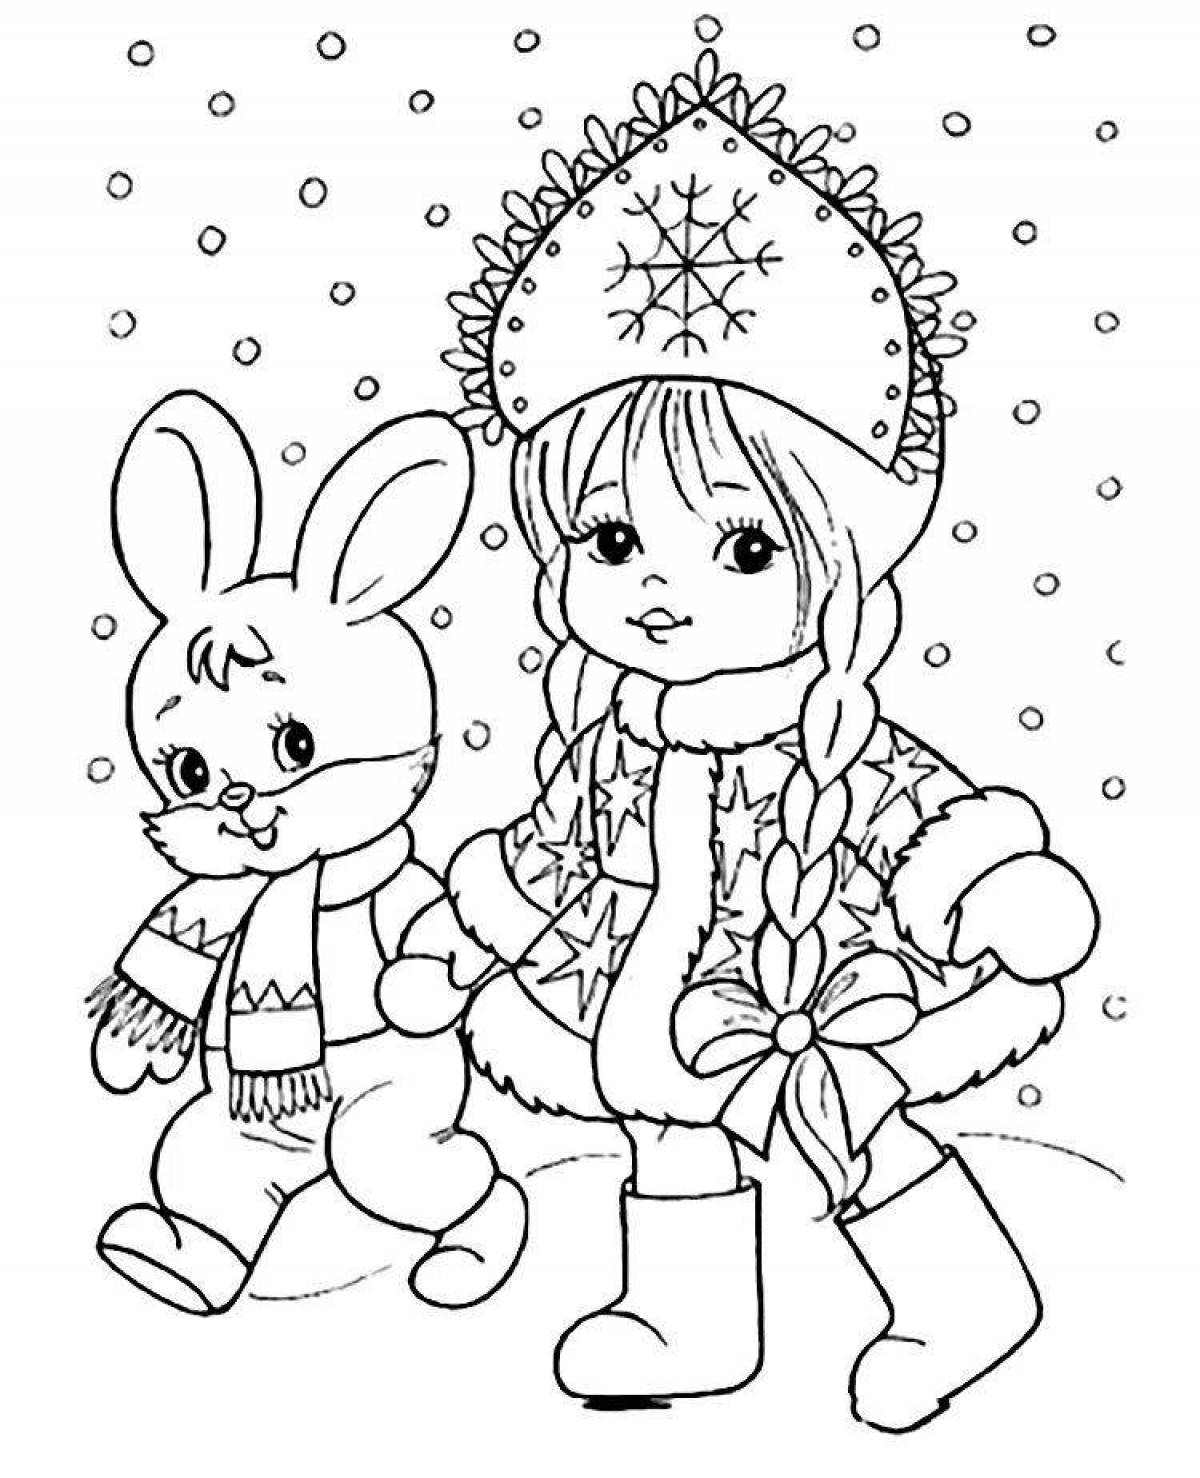 Inviting Christmas coloring book